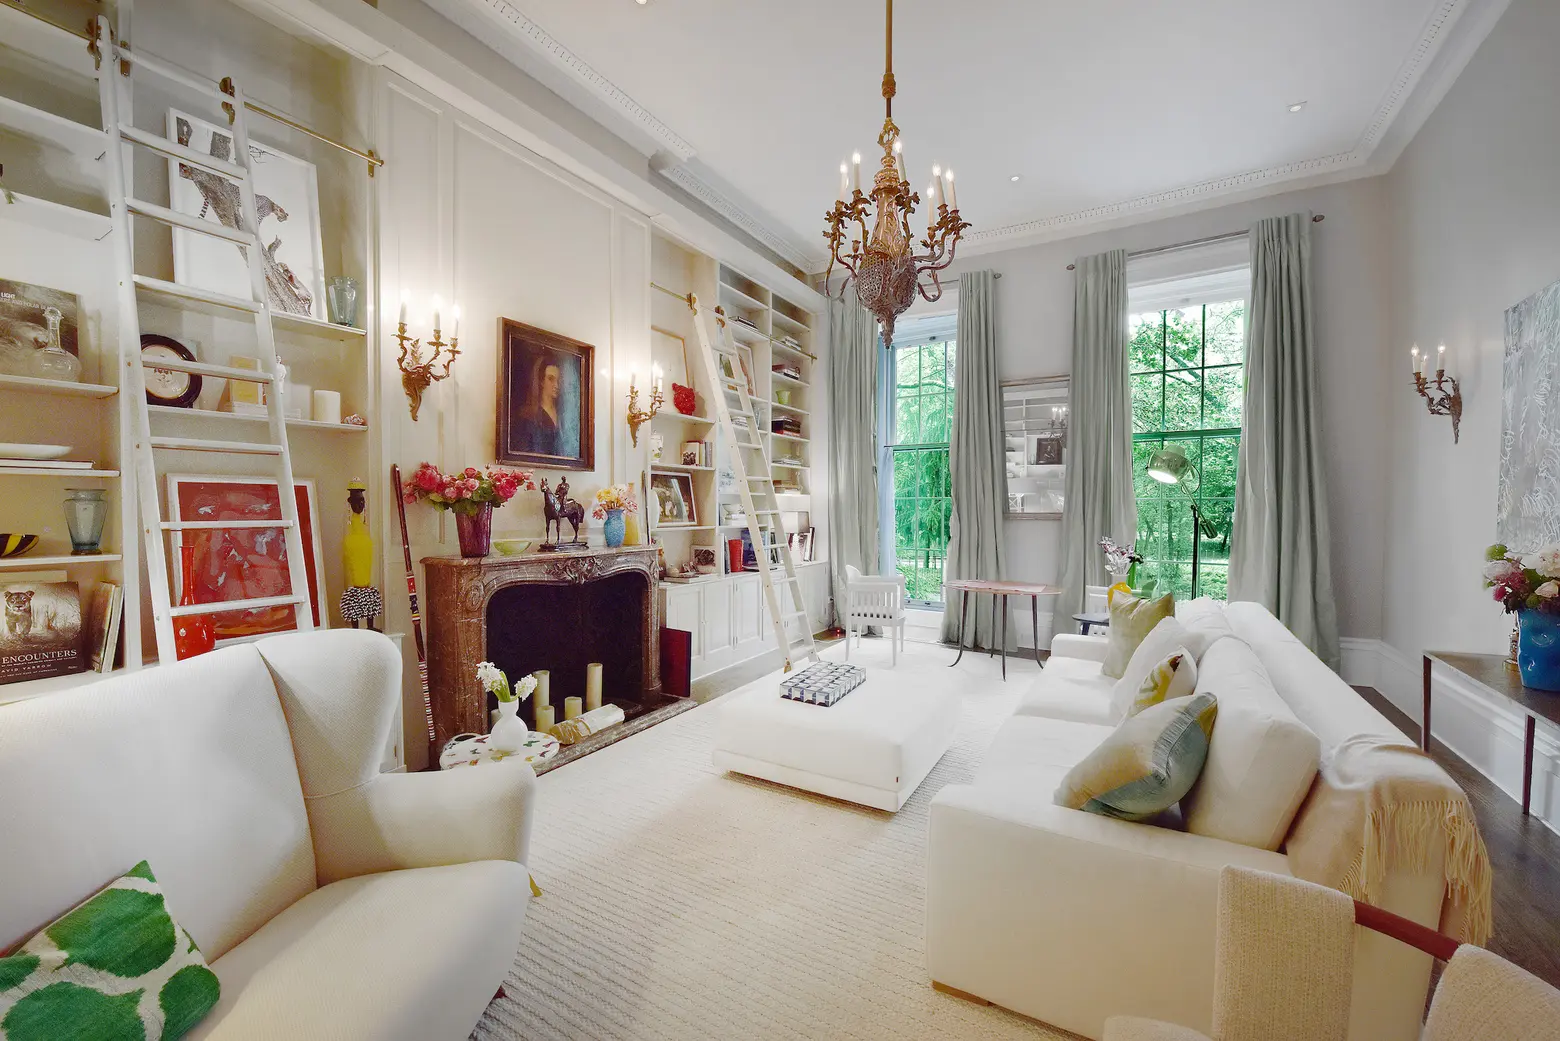 One of the last remaining privately owned townhouses on Washington Square Park asks $30M